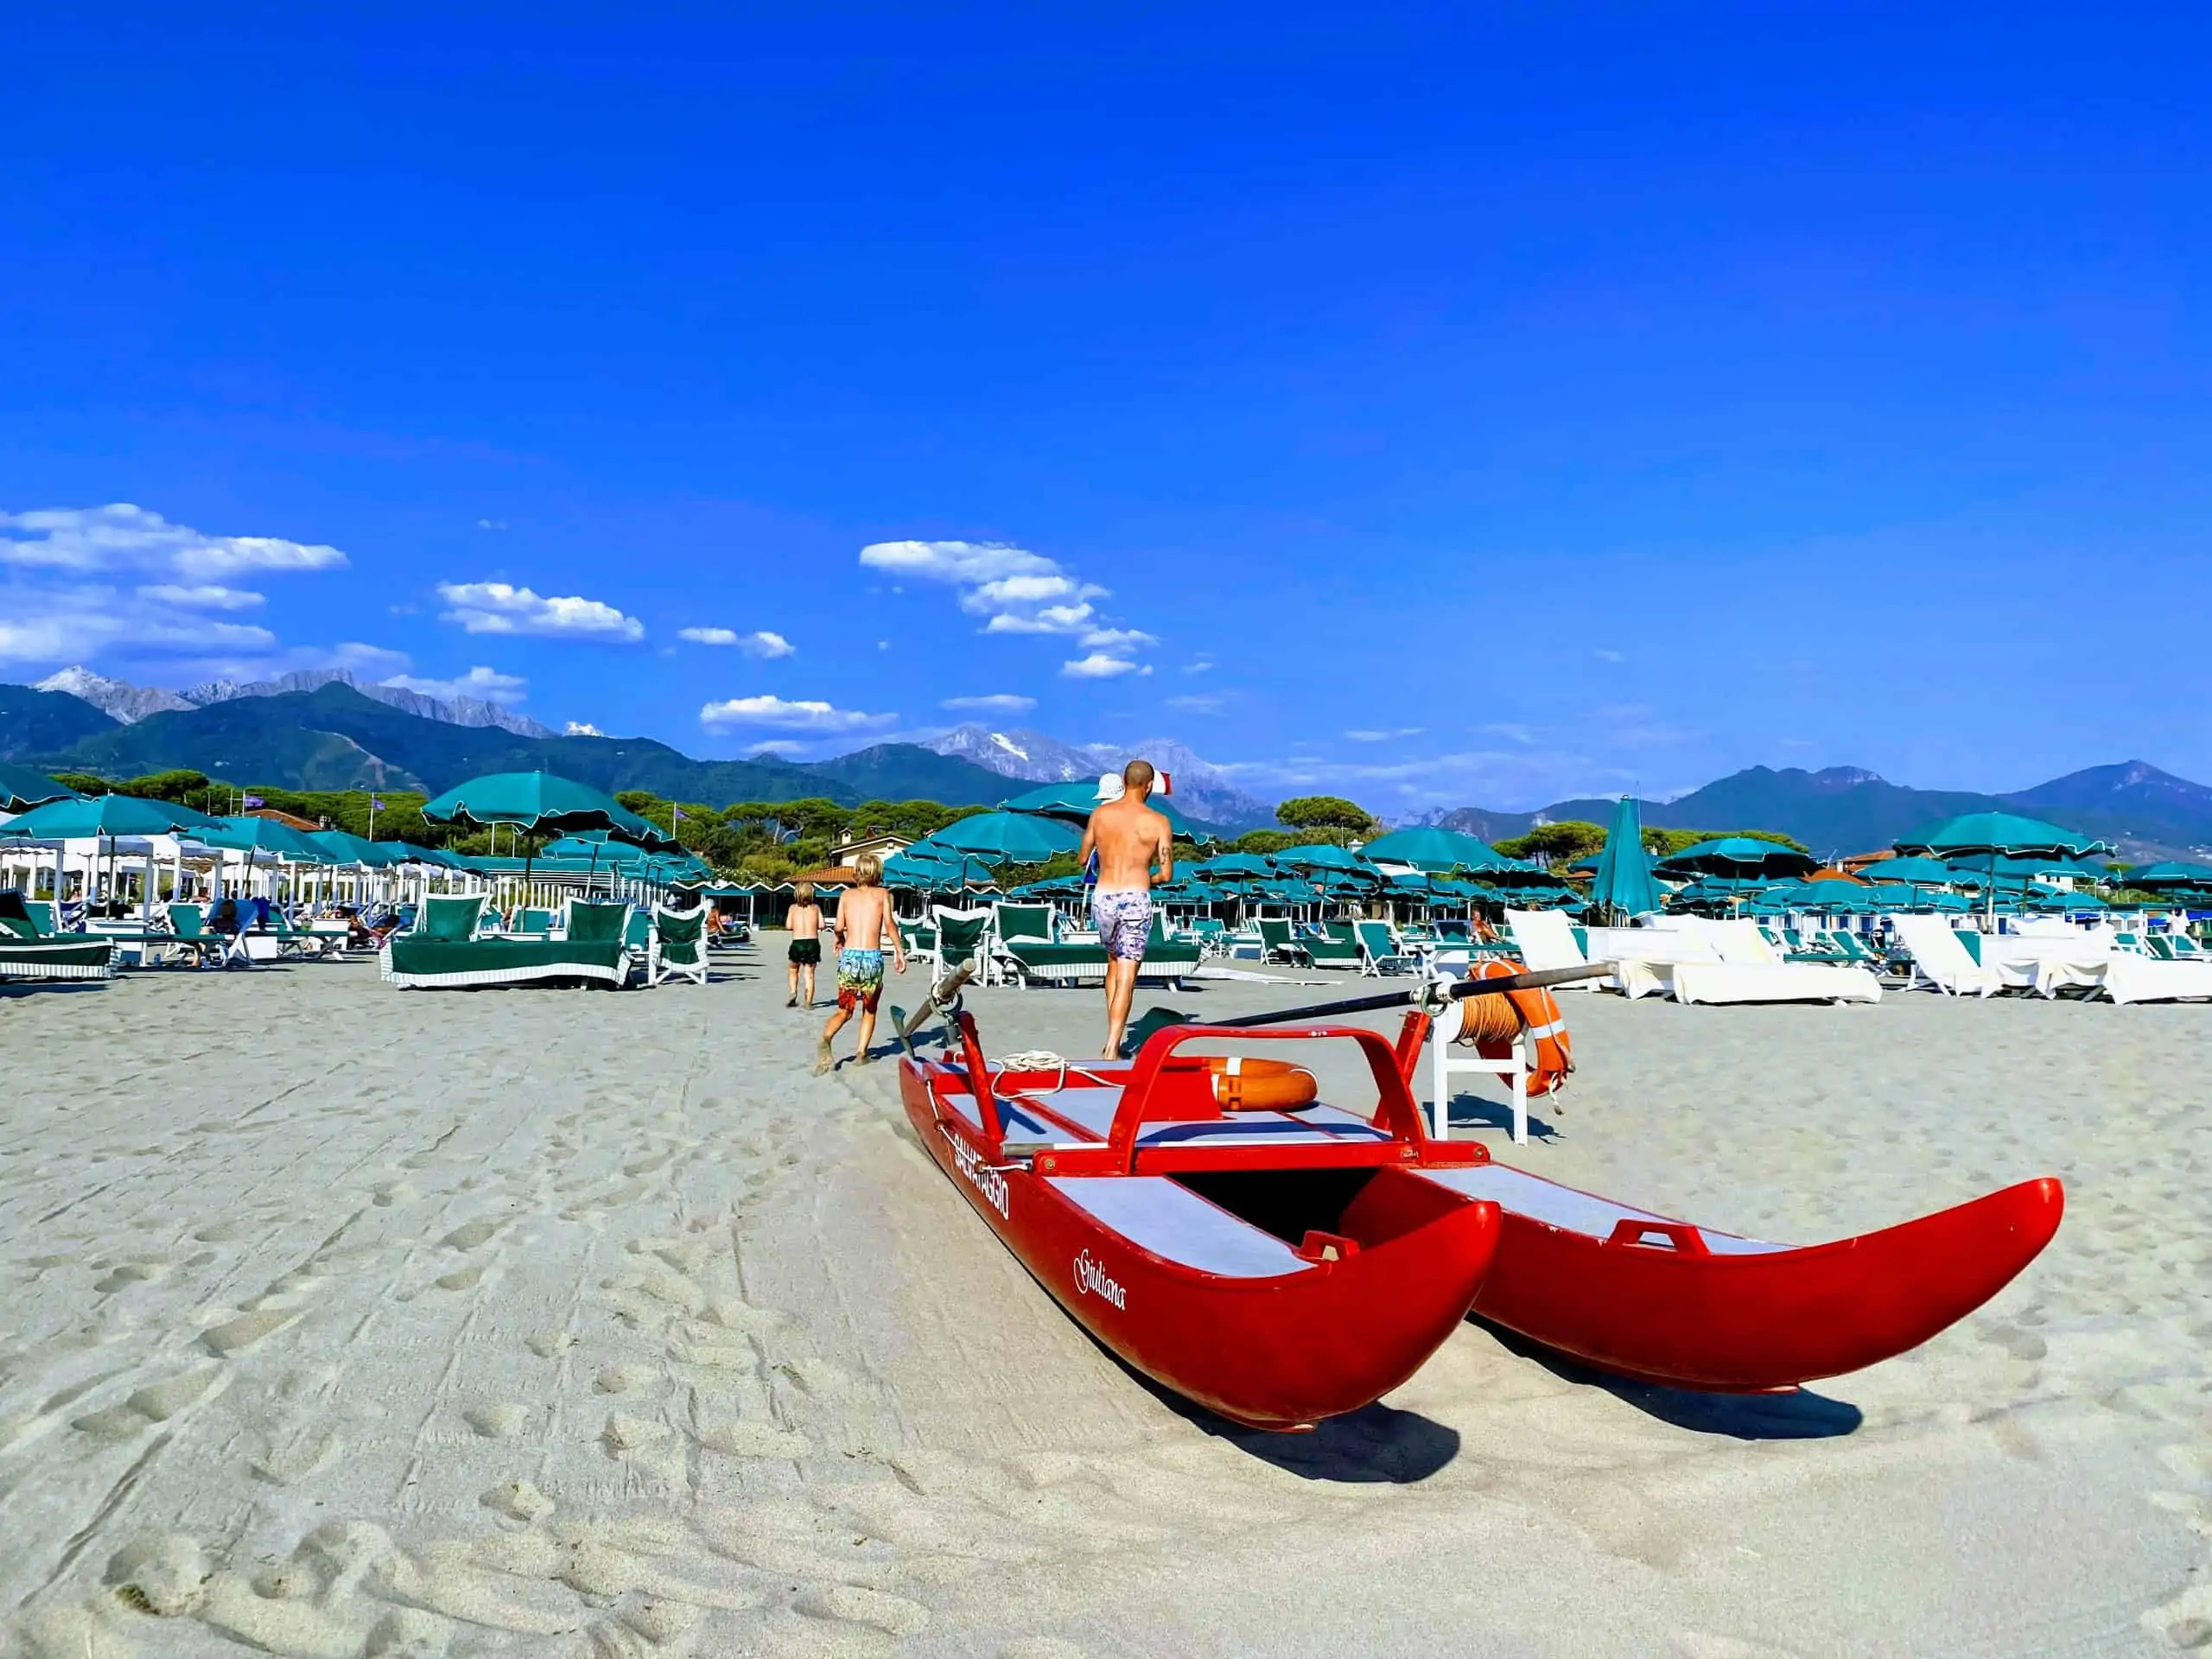 Beach with red lifeguard boat on sand in forte dei marmi, italy.